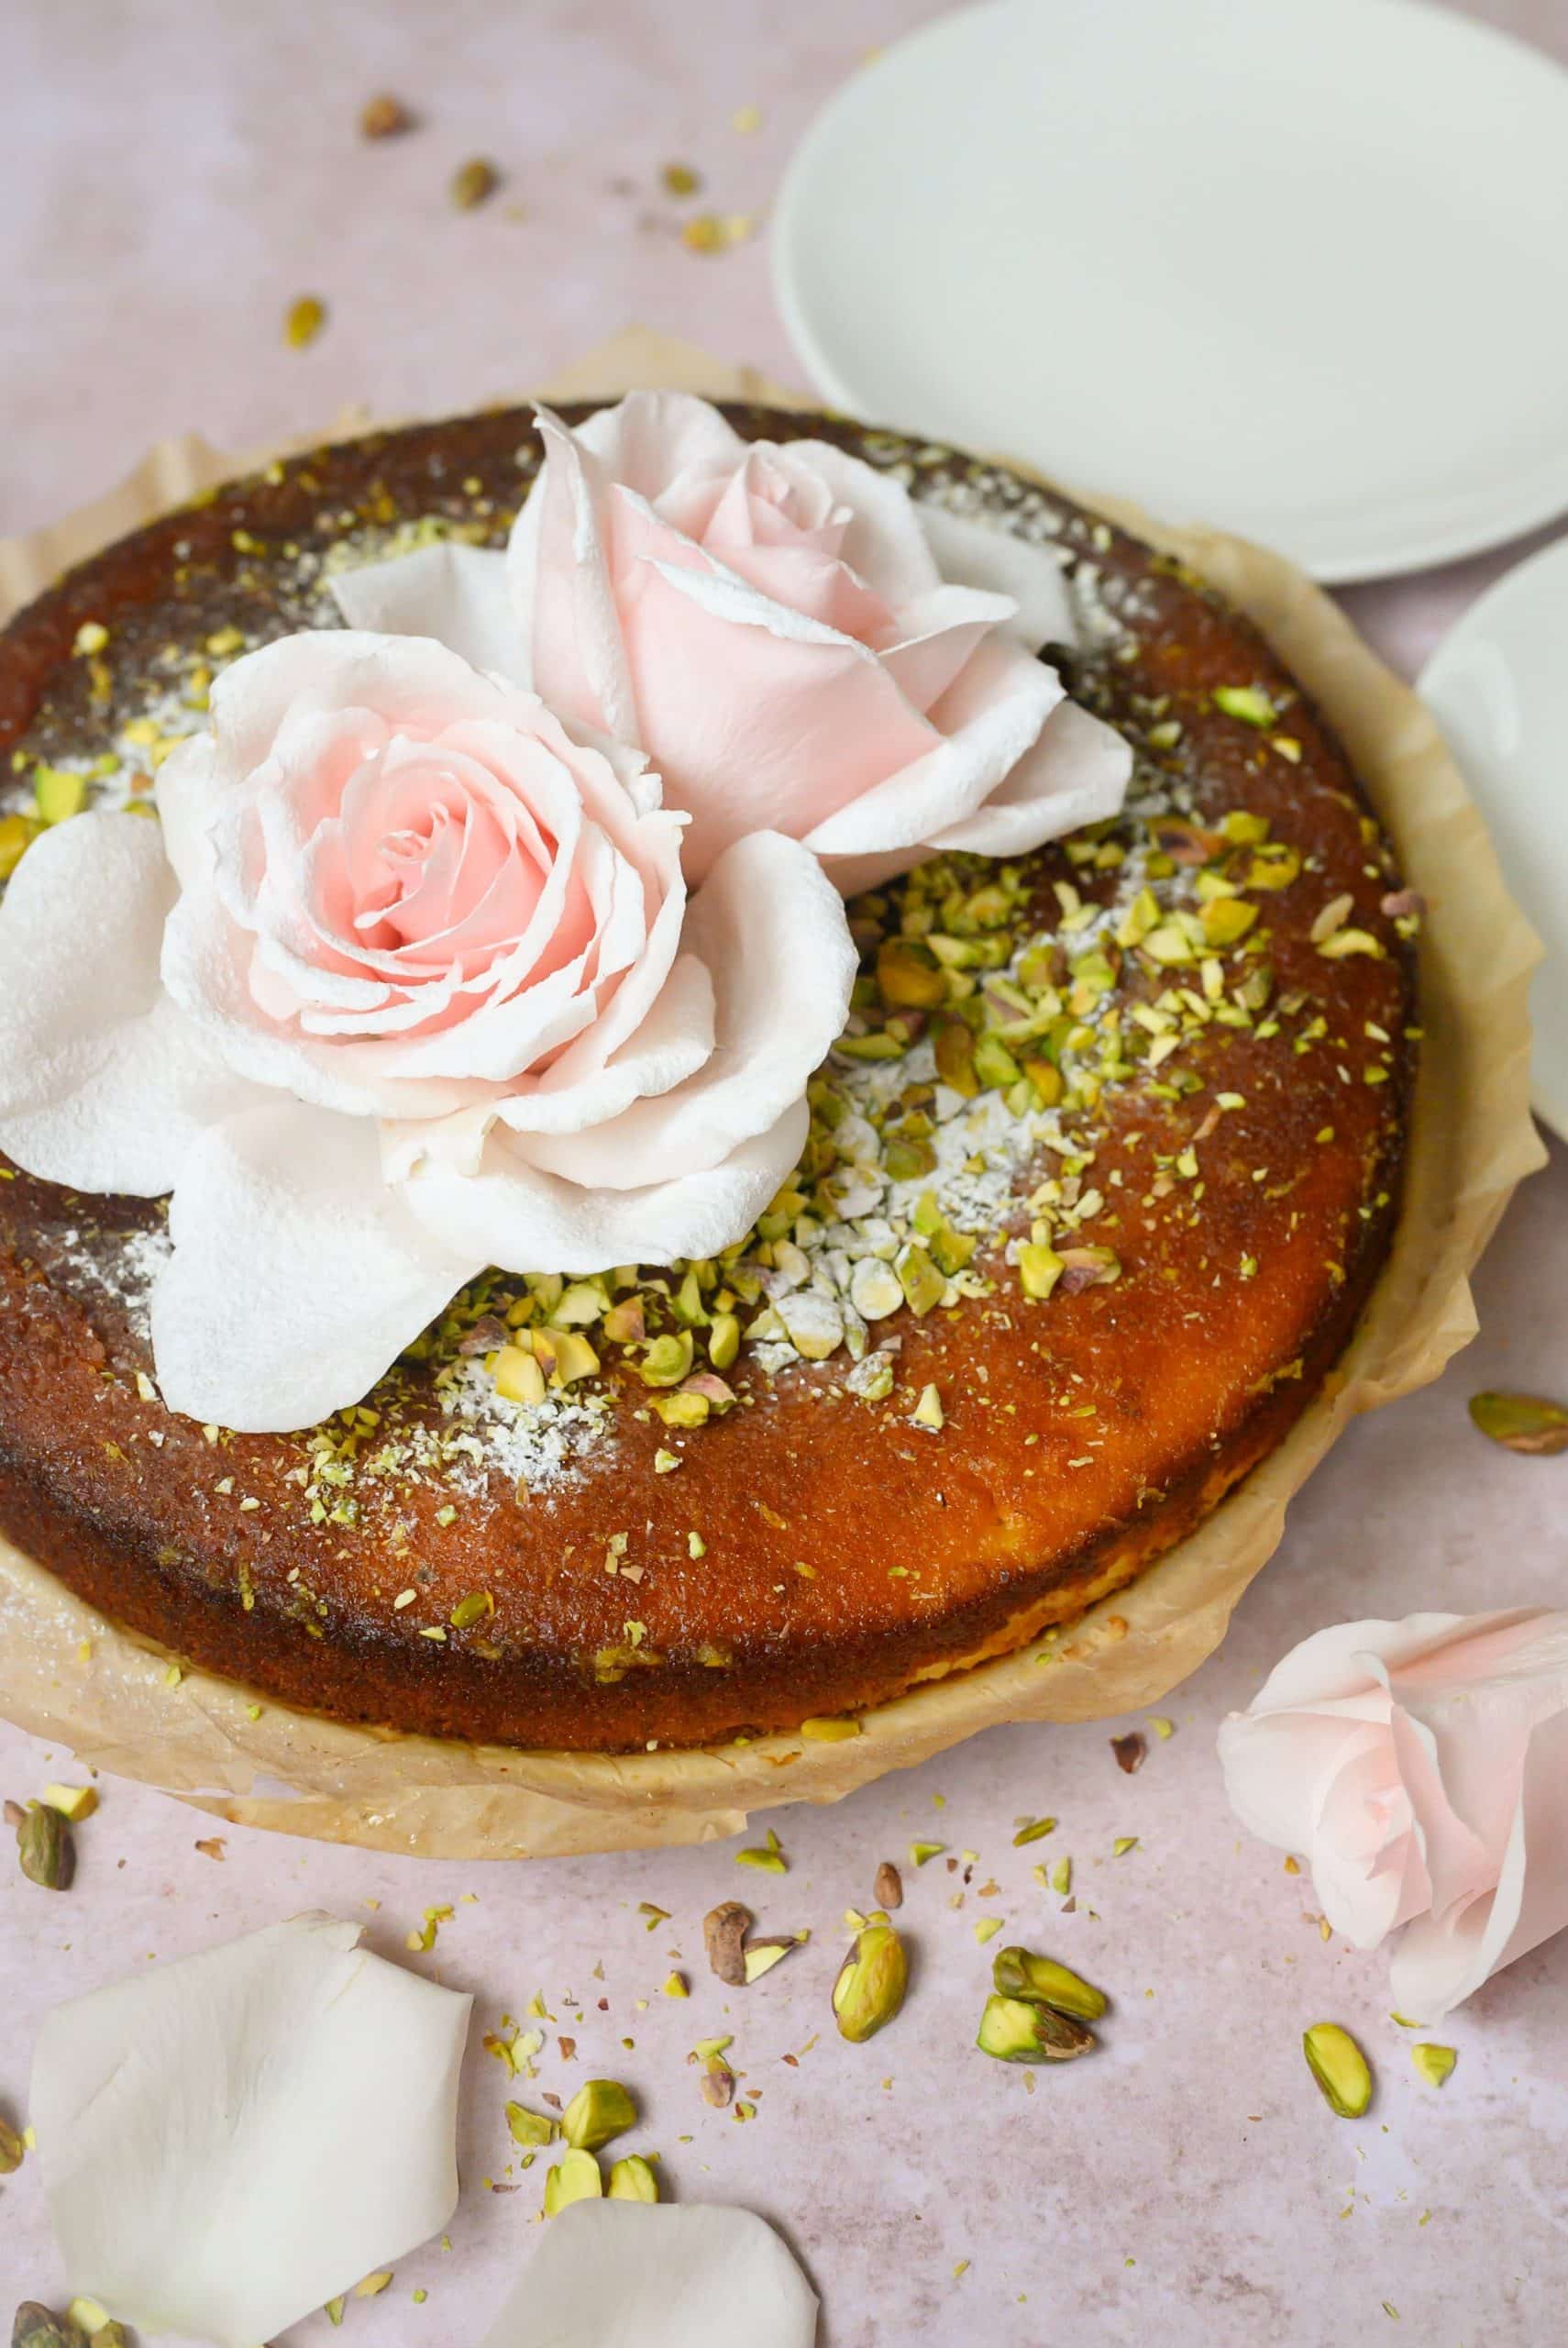 An orange cardamom pistachio rosewater cake from the Middle East